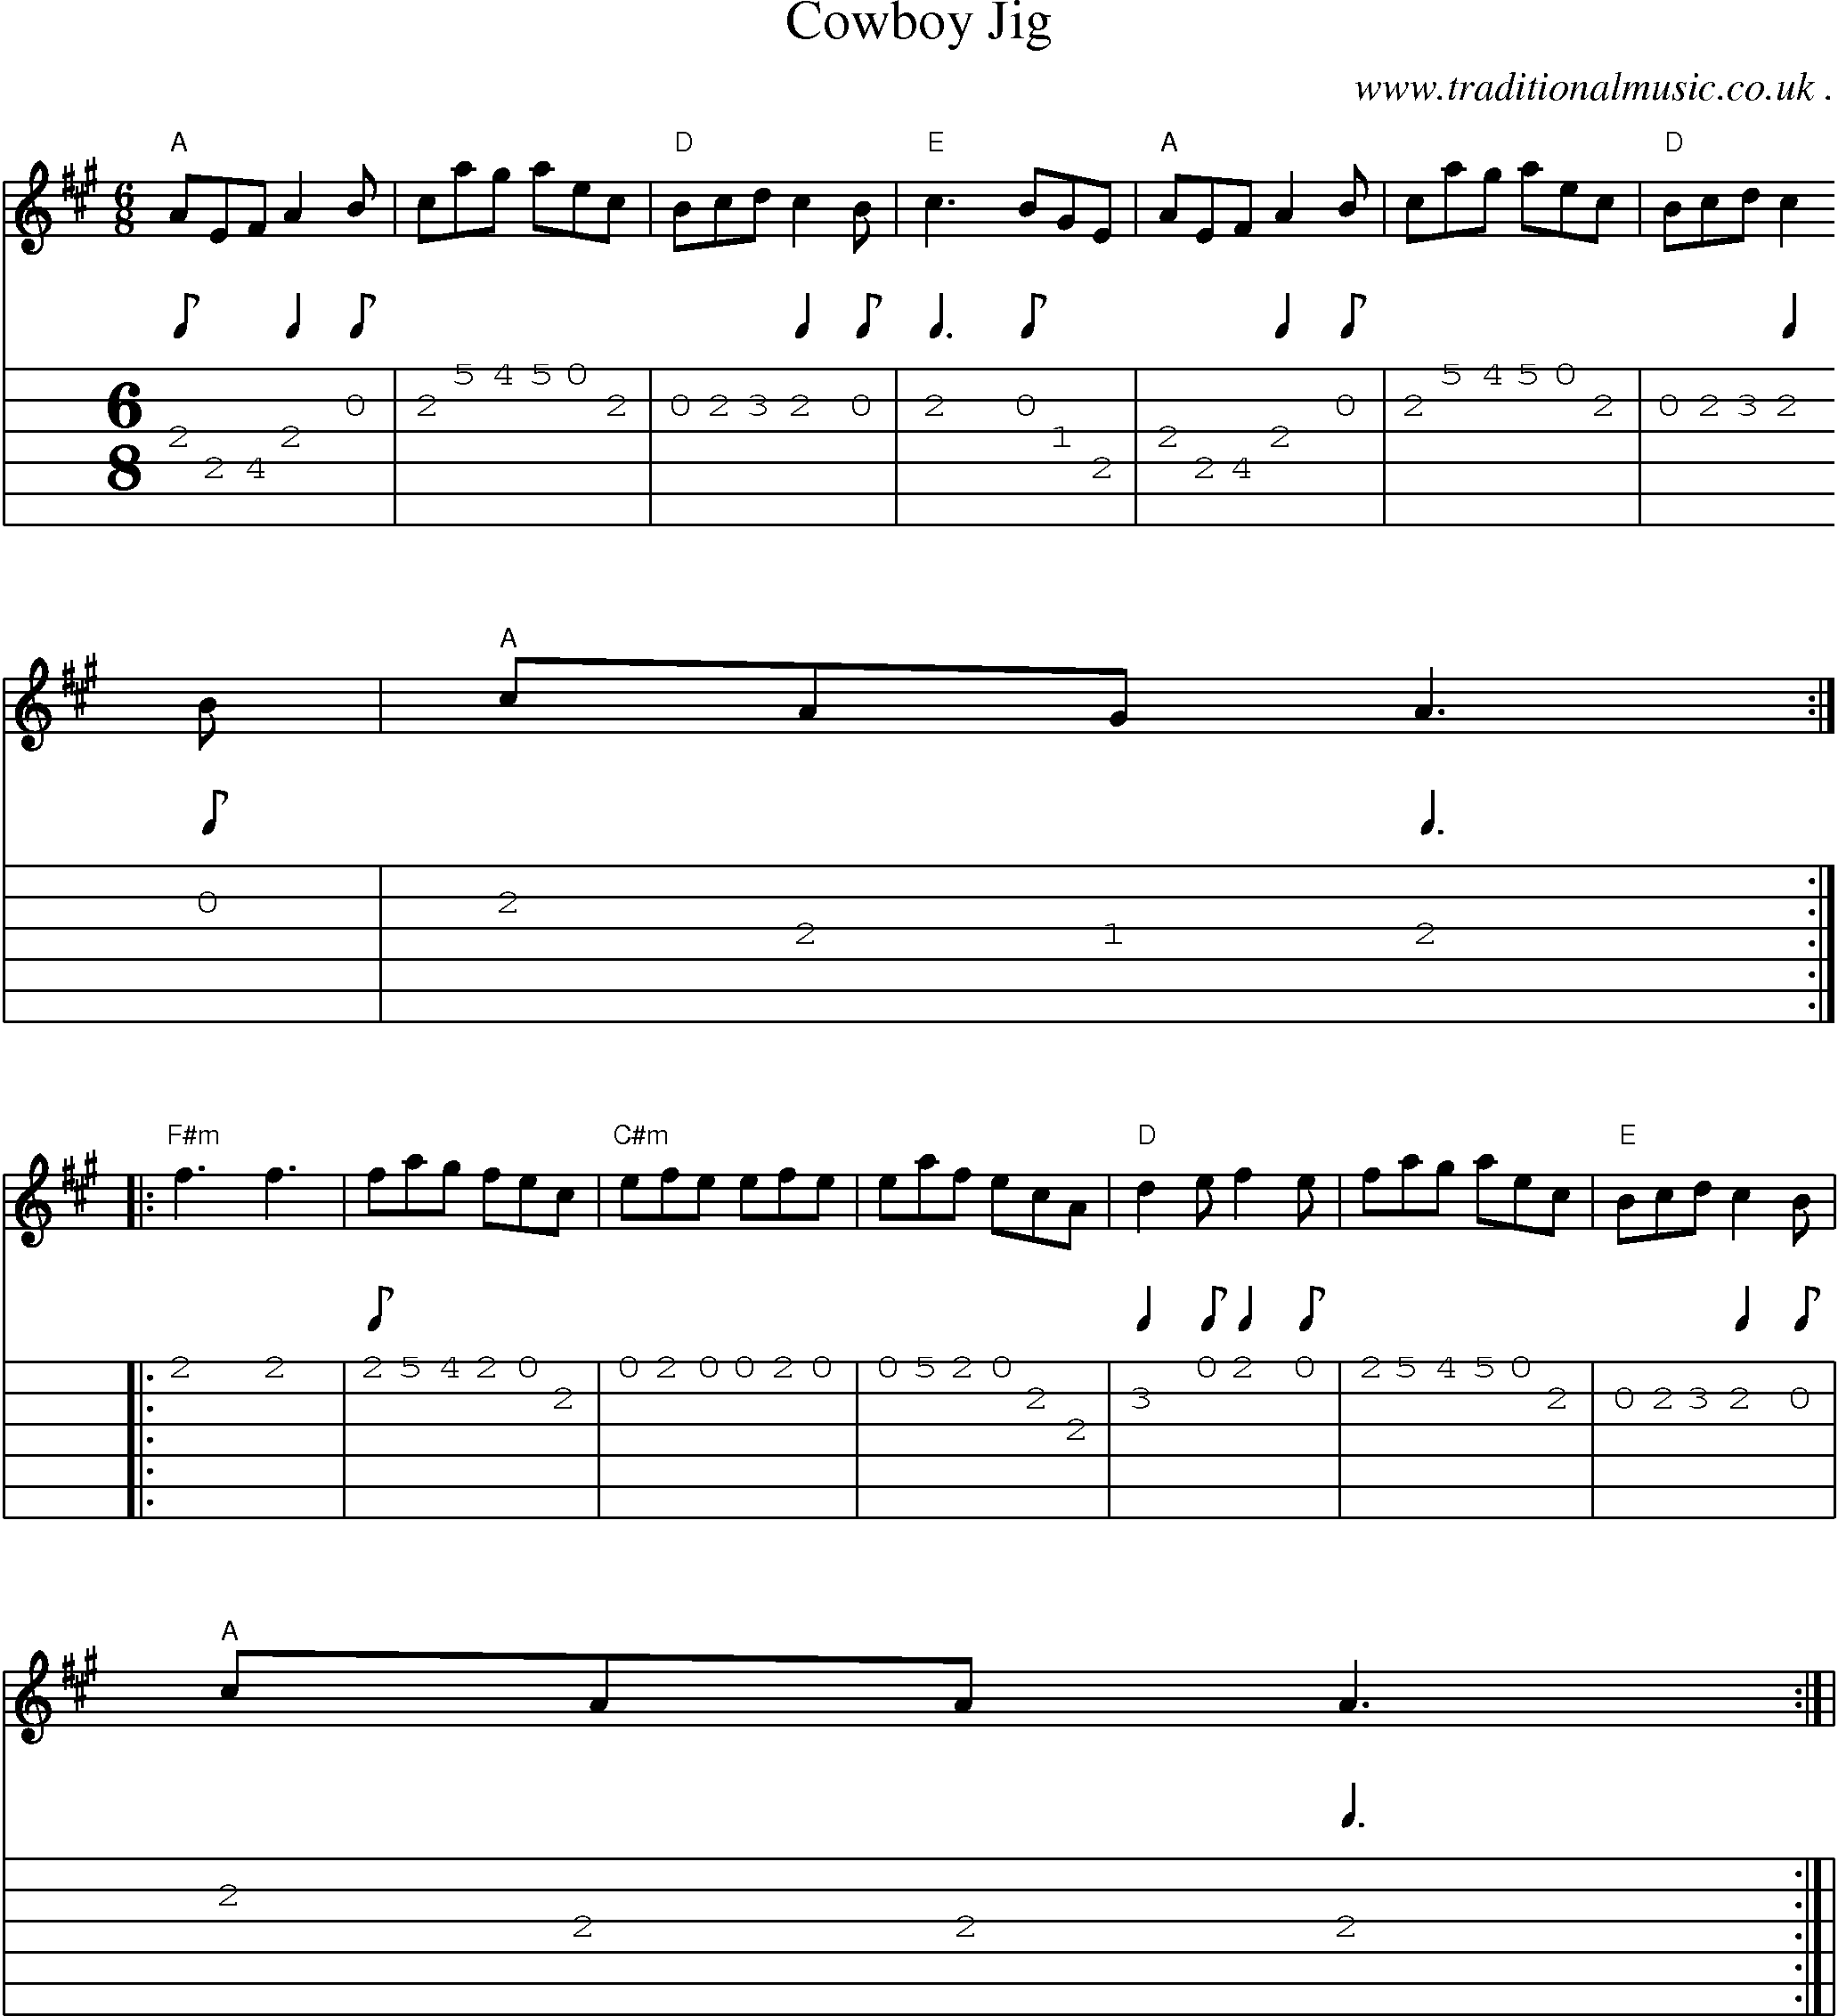 Sheet-Music and Guitar Tabs for Cowboy Jig